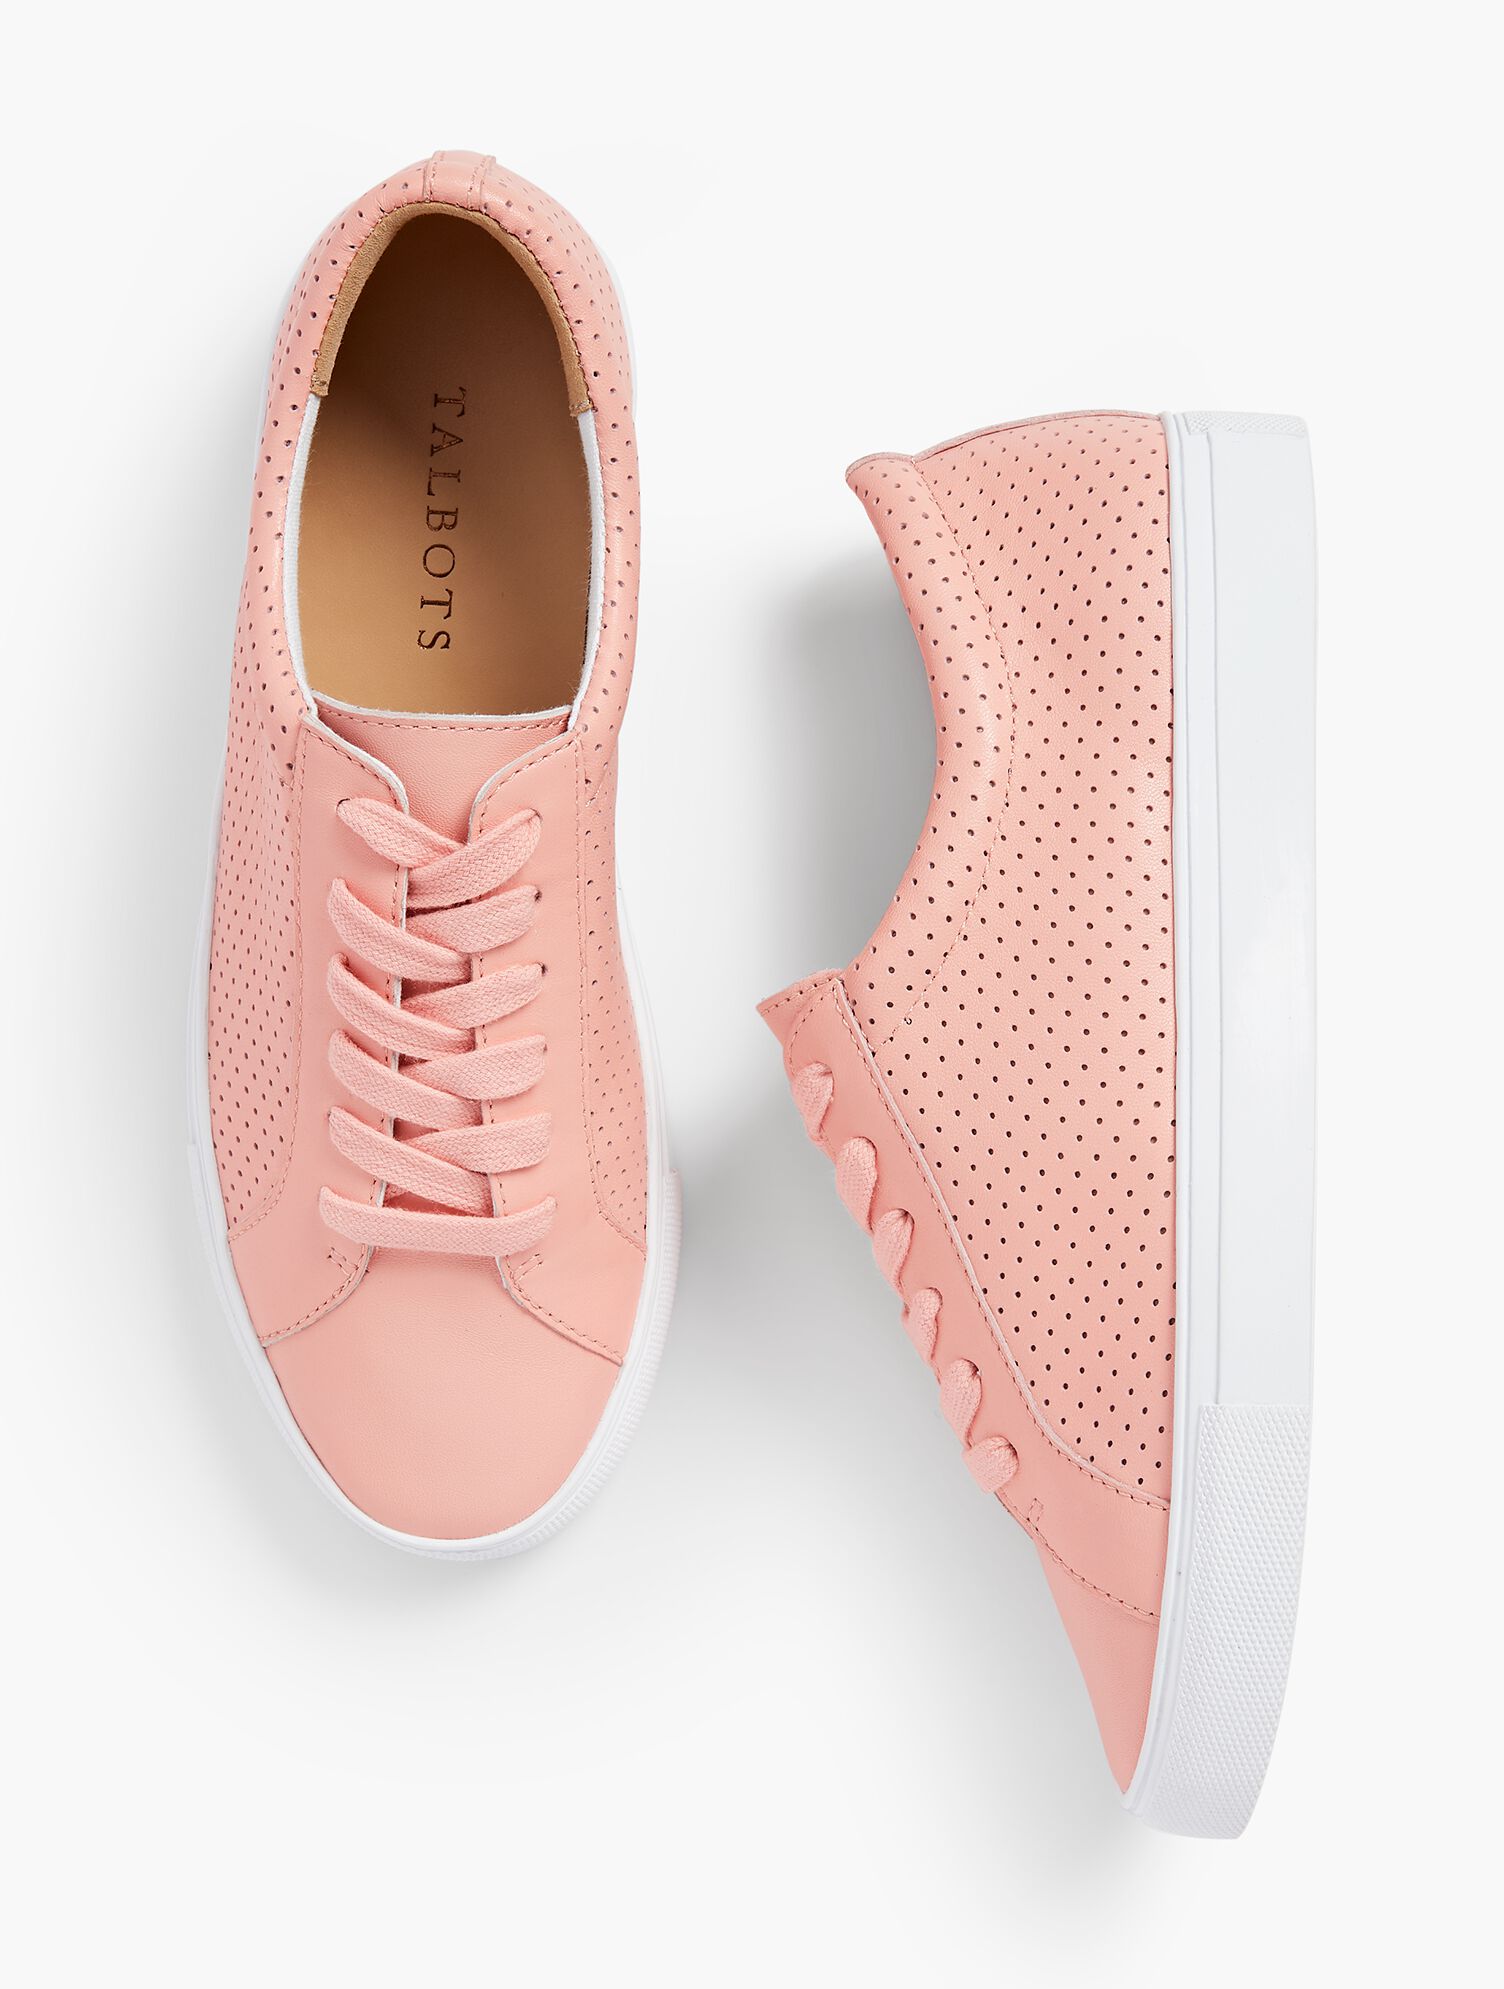 Perforated Leather Sneakers | Talbots